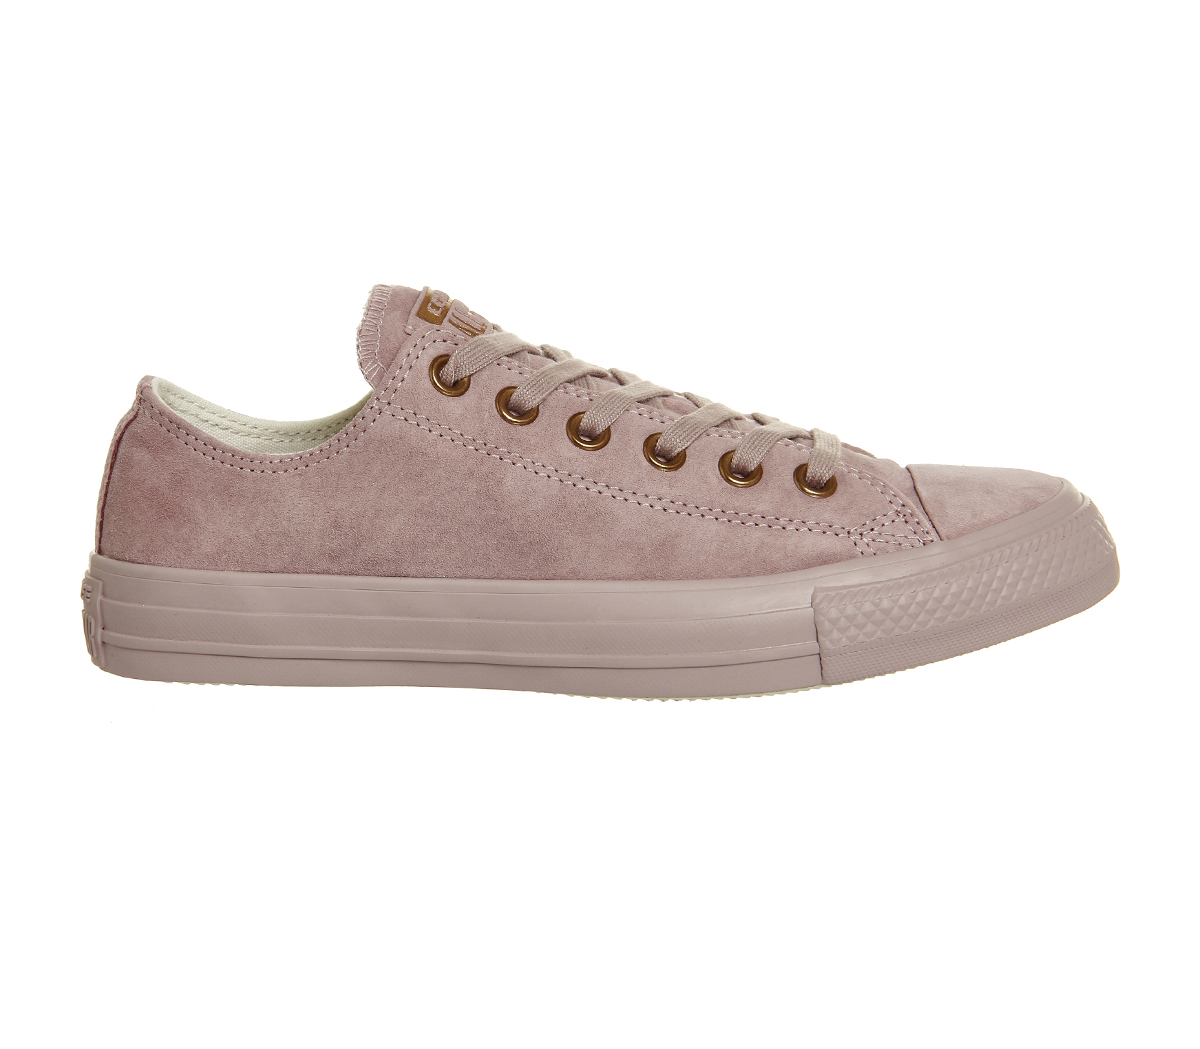 Converse All Star Low Leather Burnished Lilac Rose Gold - Hers trainers